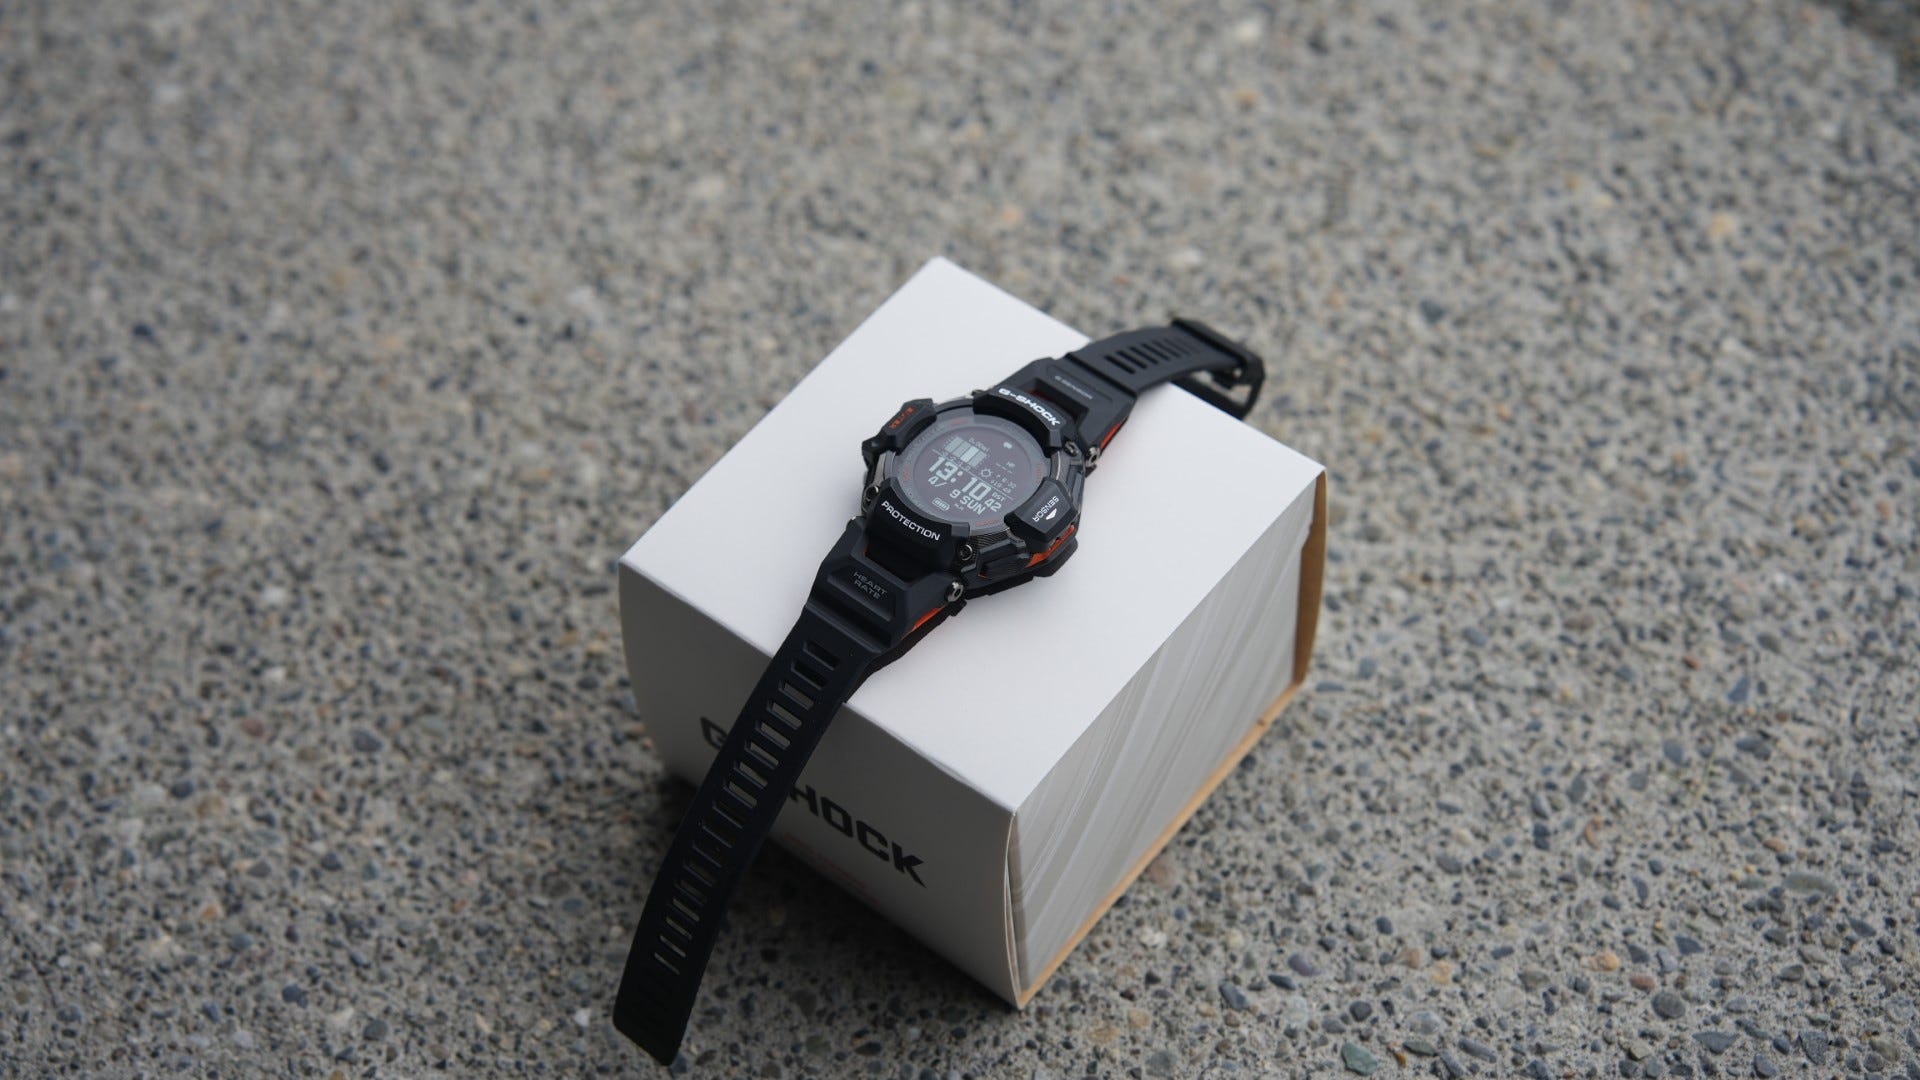 review: G-SHOCK Move a just rugged GBD-H2000 watch than More Casio